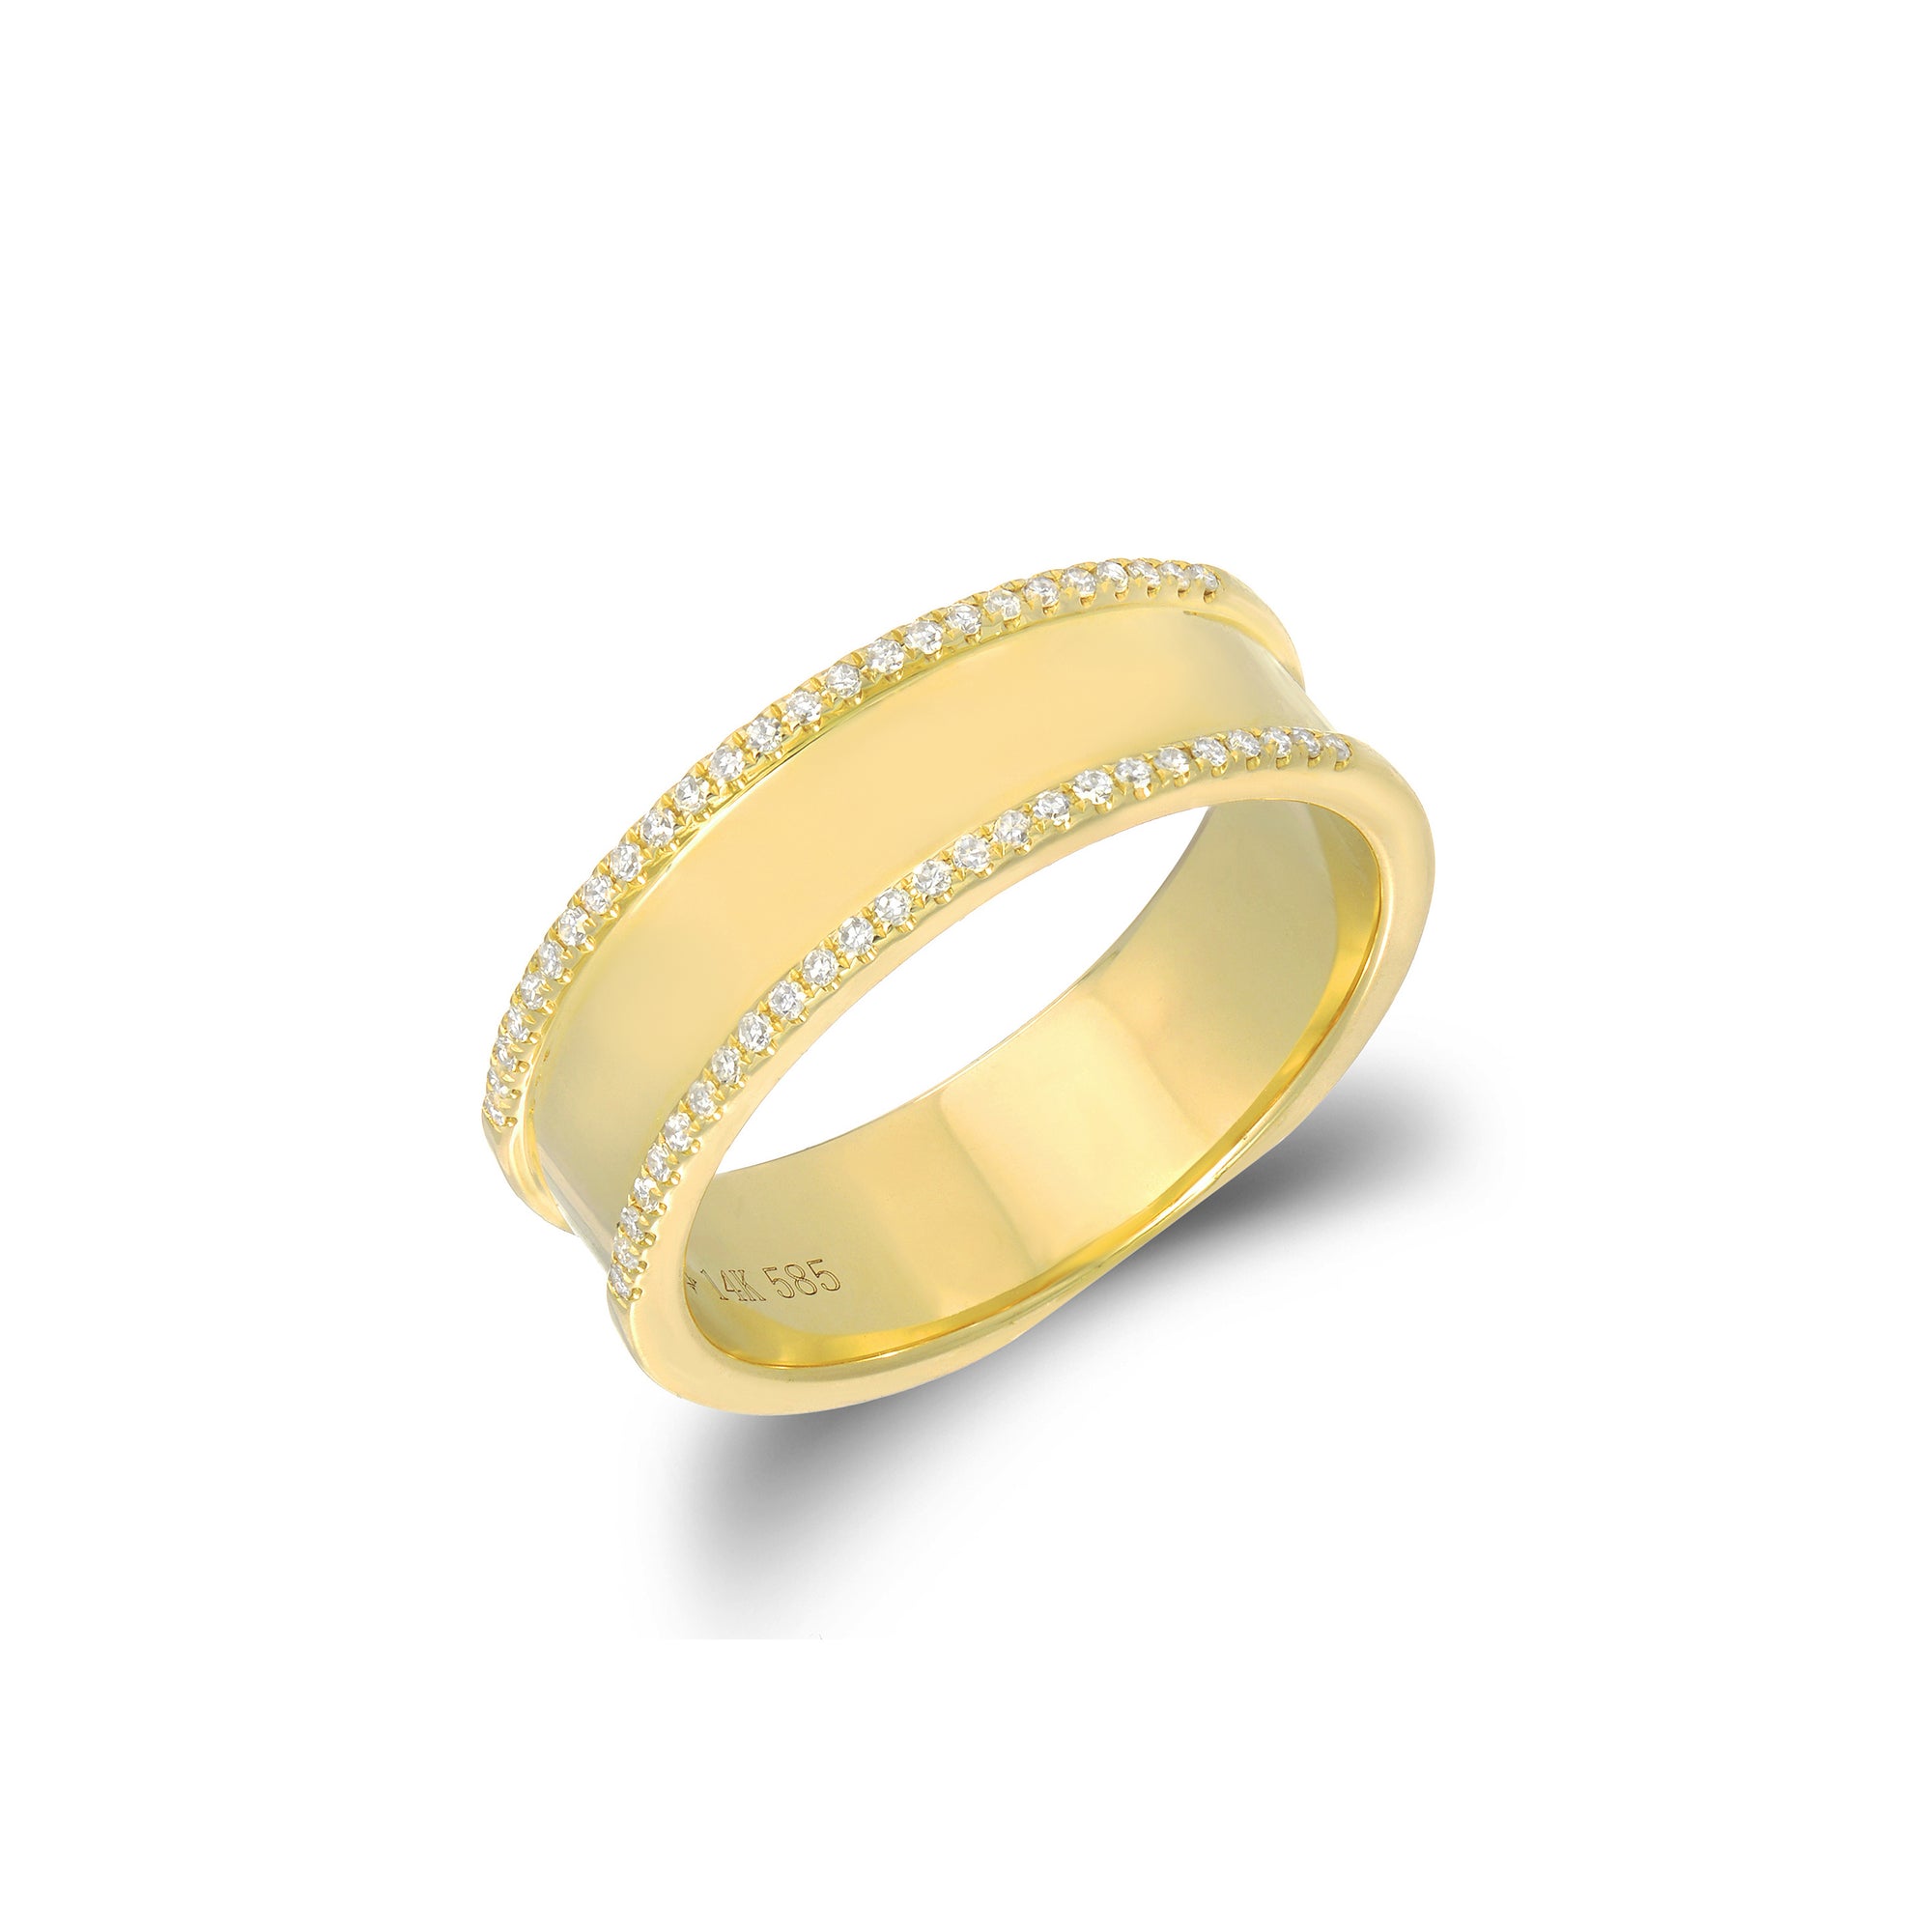 Diamond Outlined Gold Ring  *High polish finish  -14k gold weighing 5.27 grams  -50 round diamonds weighing .13 carats